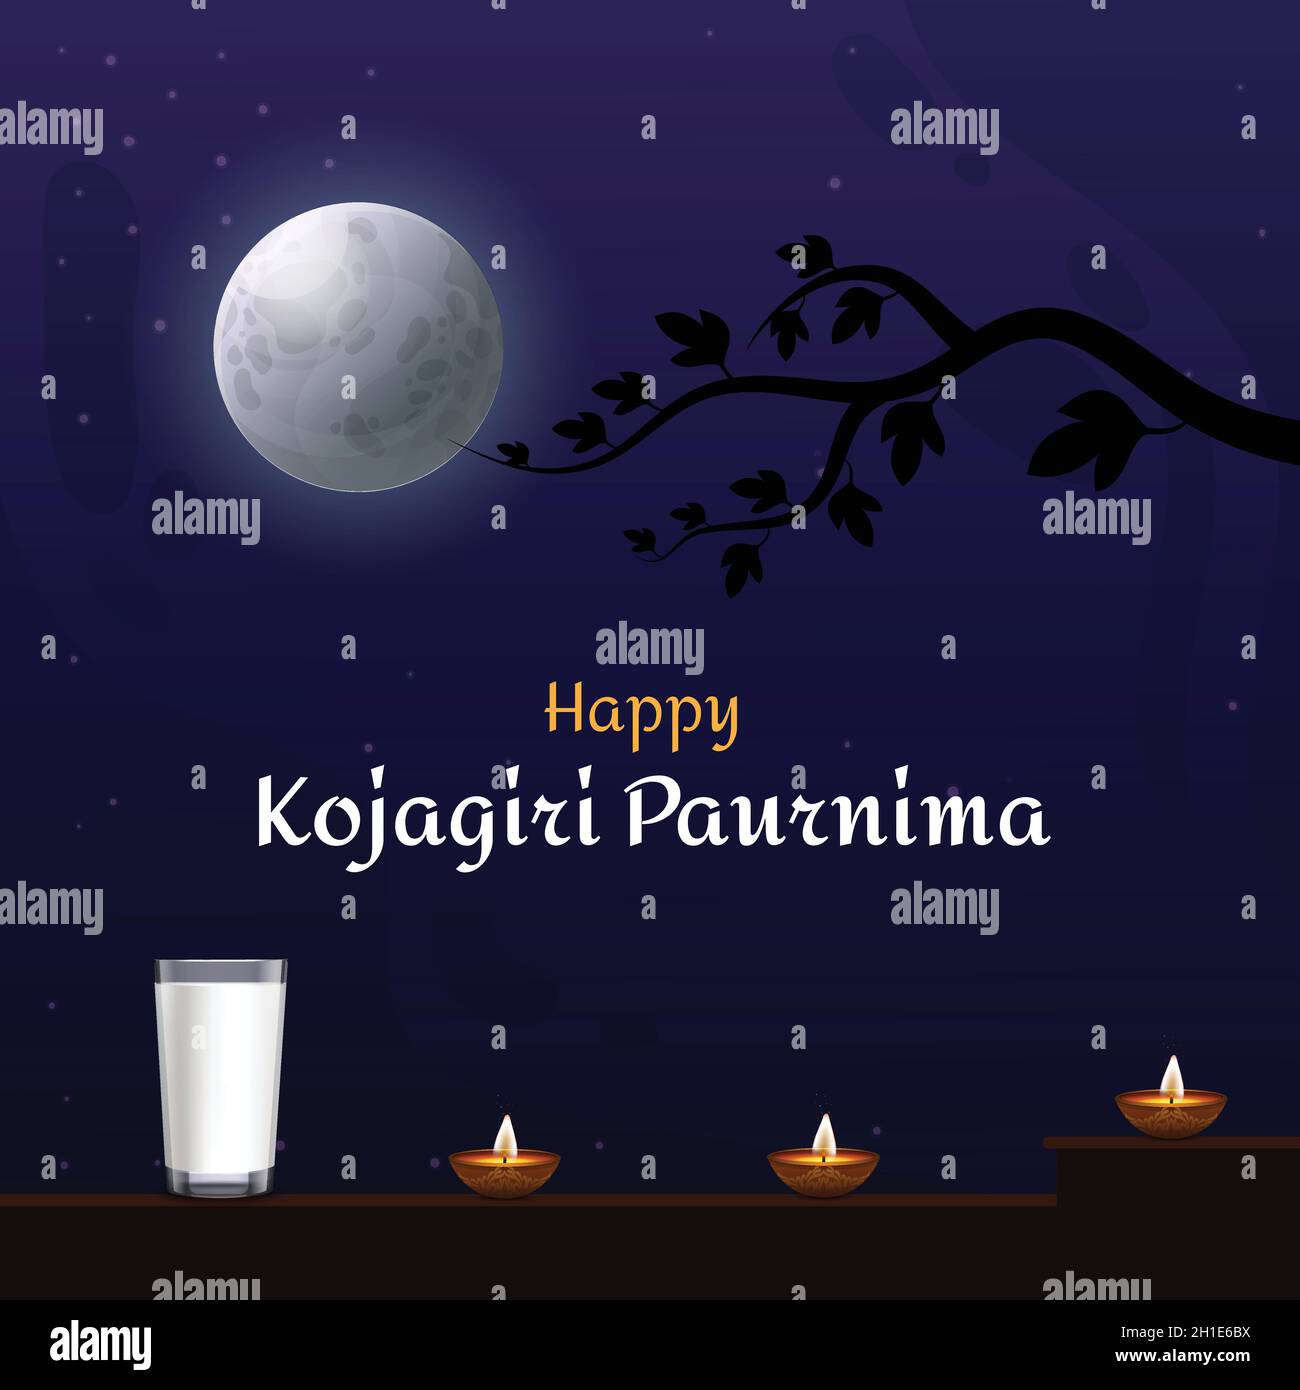 Illustration of Kojagiri Paurnima. Poster decorated with full Moon, Tree, a glass of Milk, and diyas. Full Moon Night Background. Stock Vector